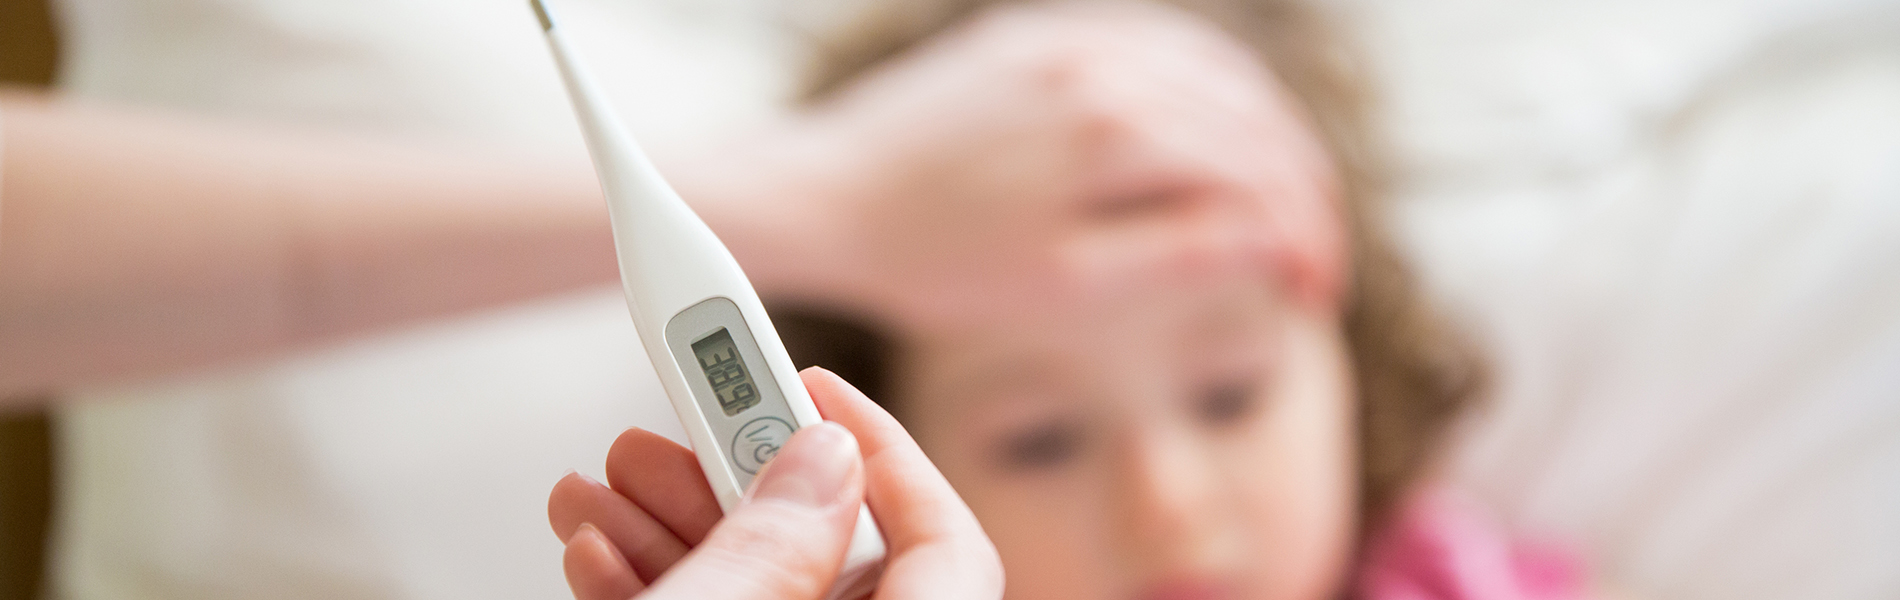 Care giver holds digital thermometer near patient